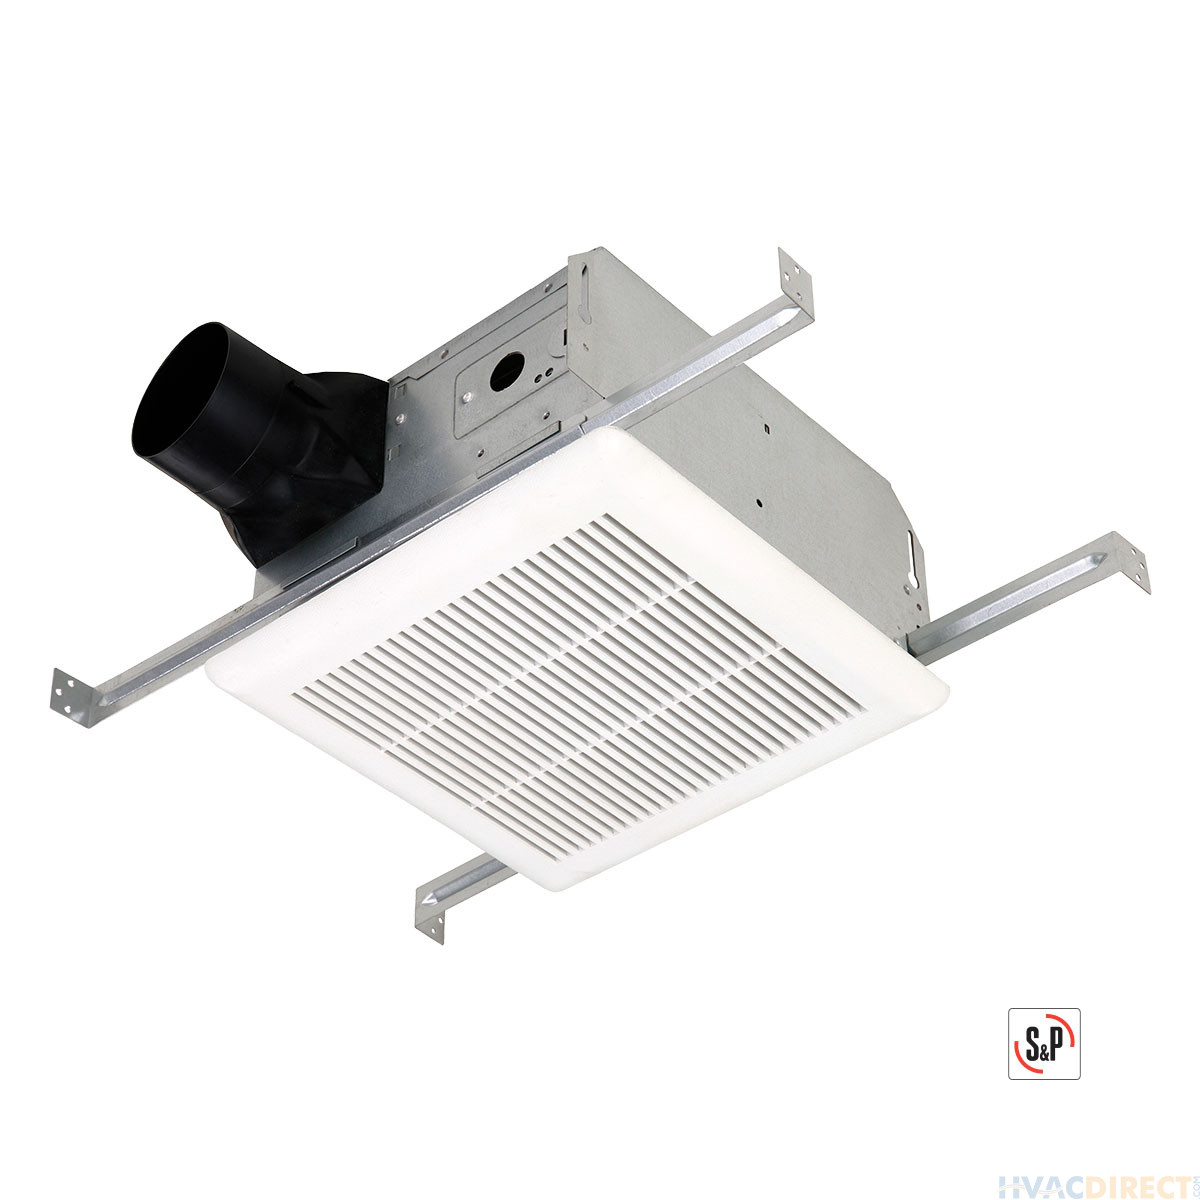 S&P Premium Choice Ceiling Mounted Bathroom Exhaust Fan With Humidity Sensor - PCD80XH